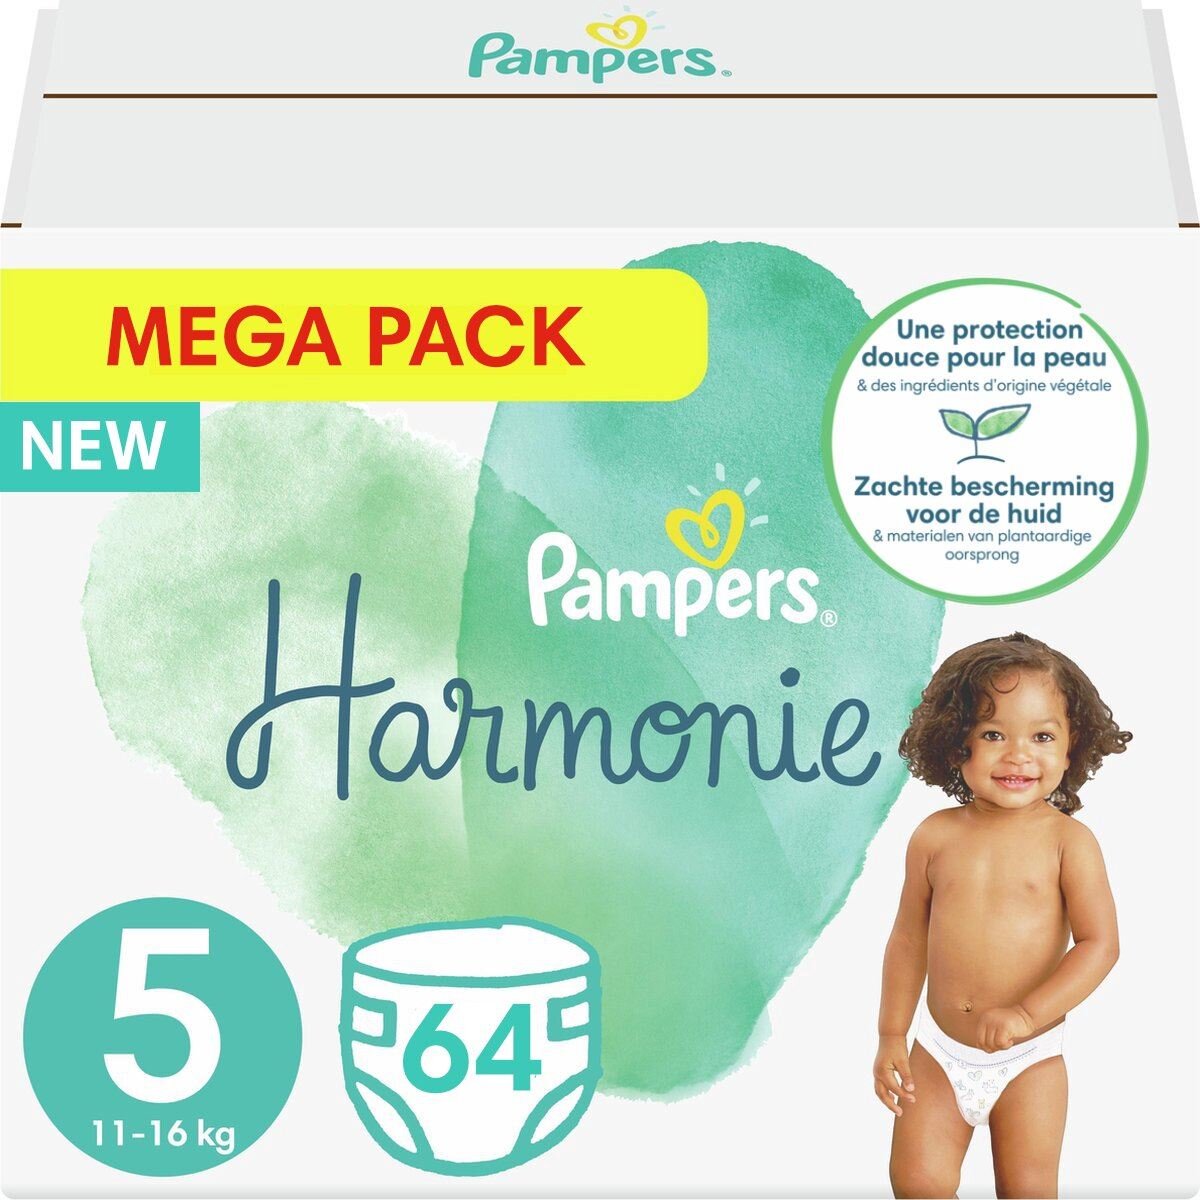 pampers alle